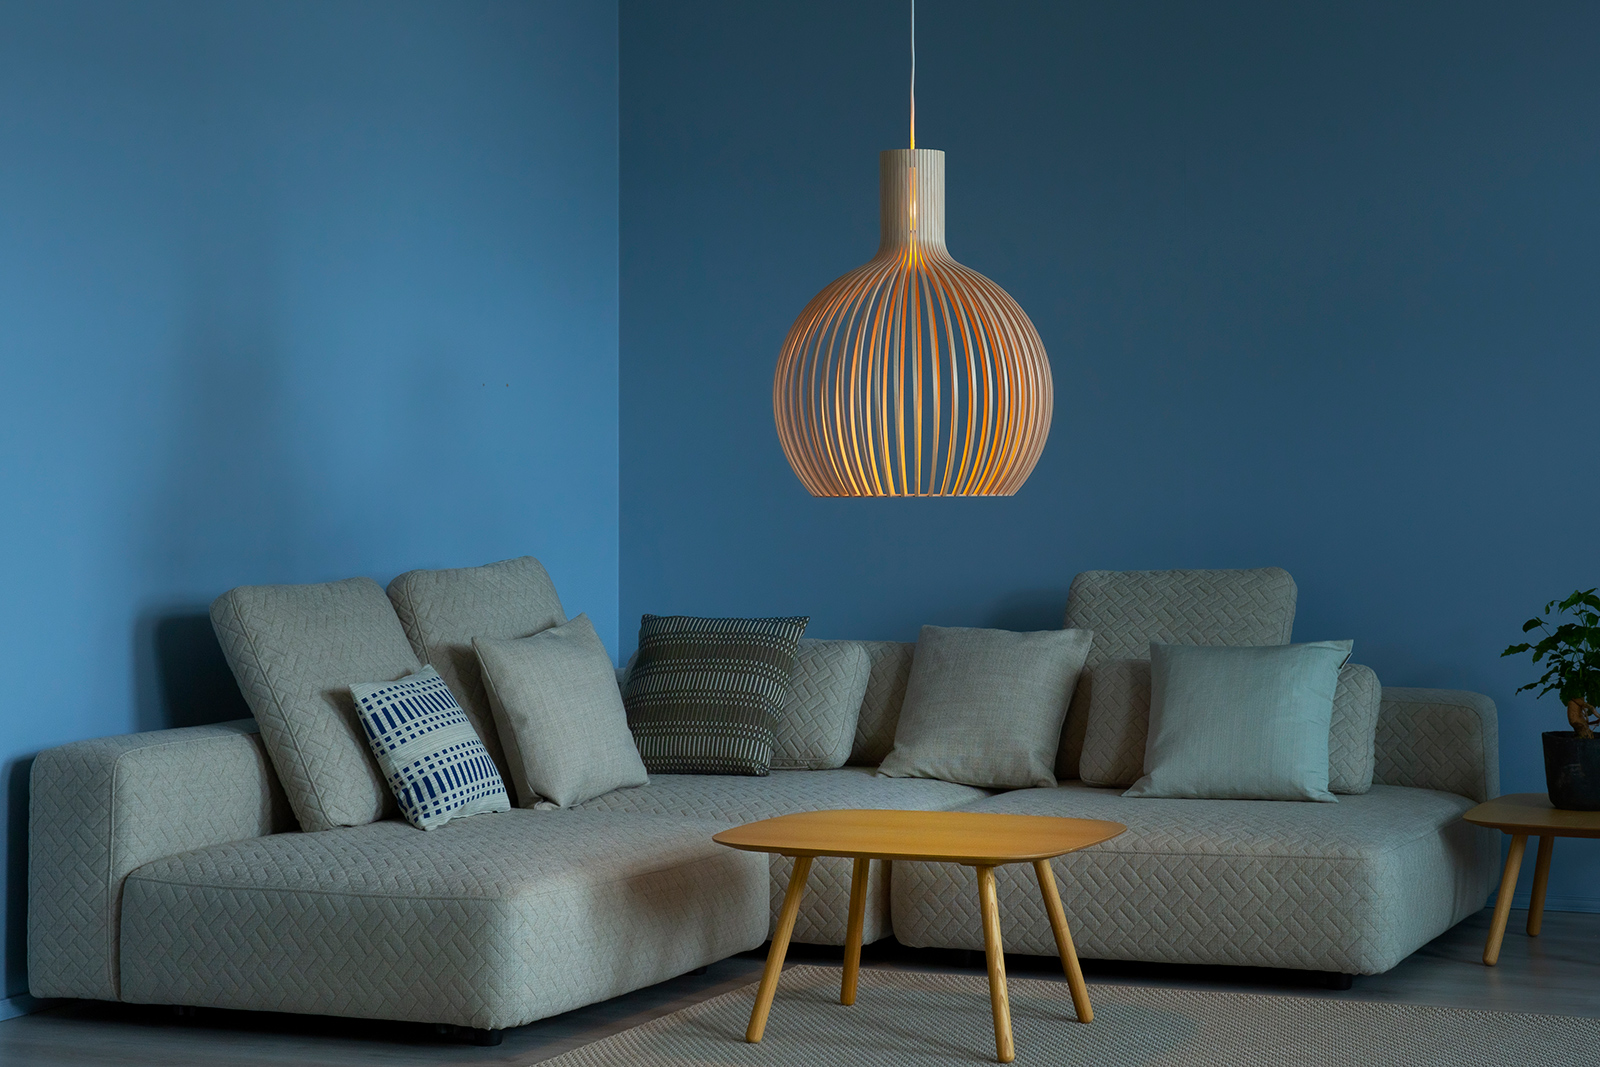 The Octo pendant lamp in birch, hanging over a coffee table.